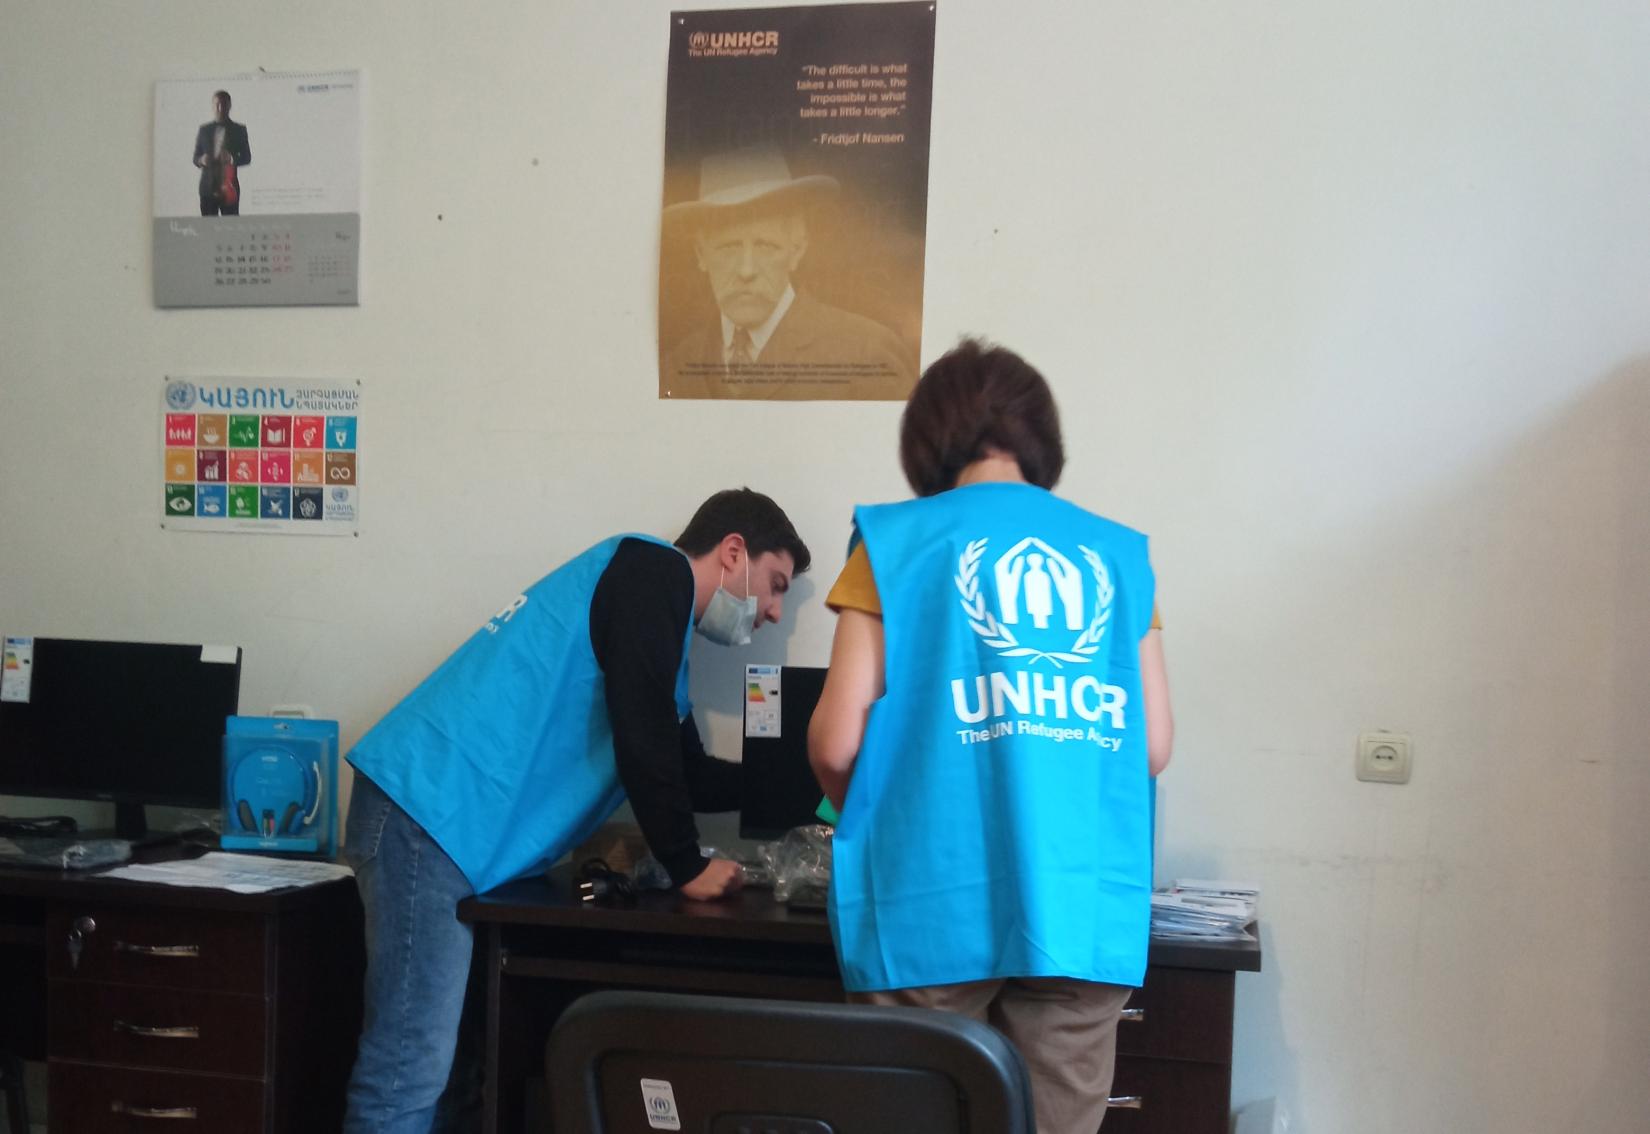 UNHCR staff helps to connect the technical equipment.